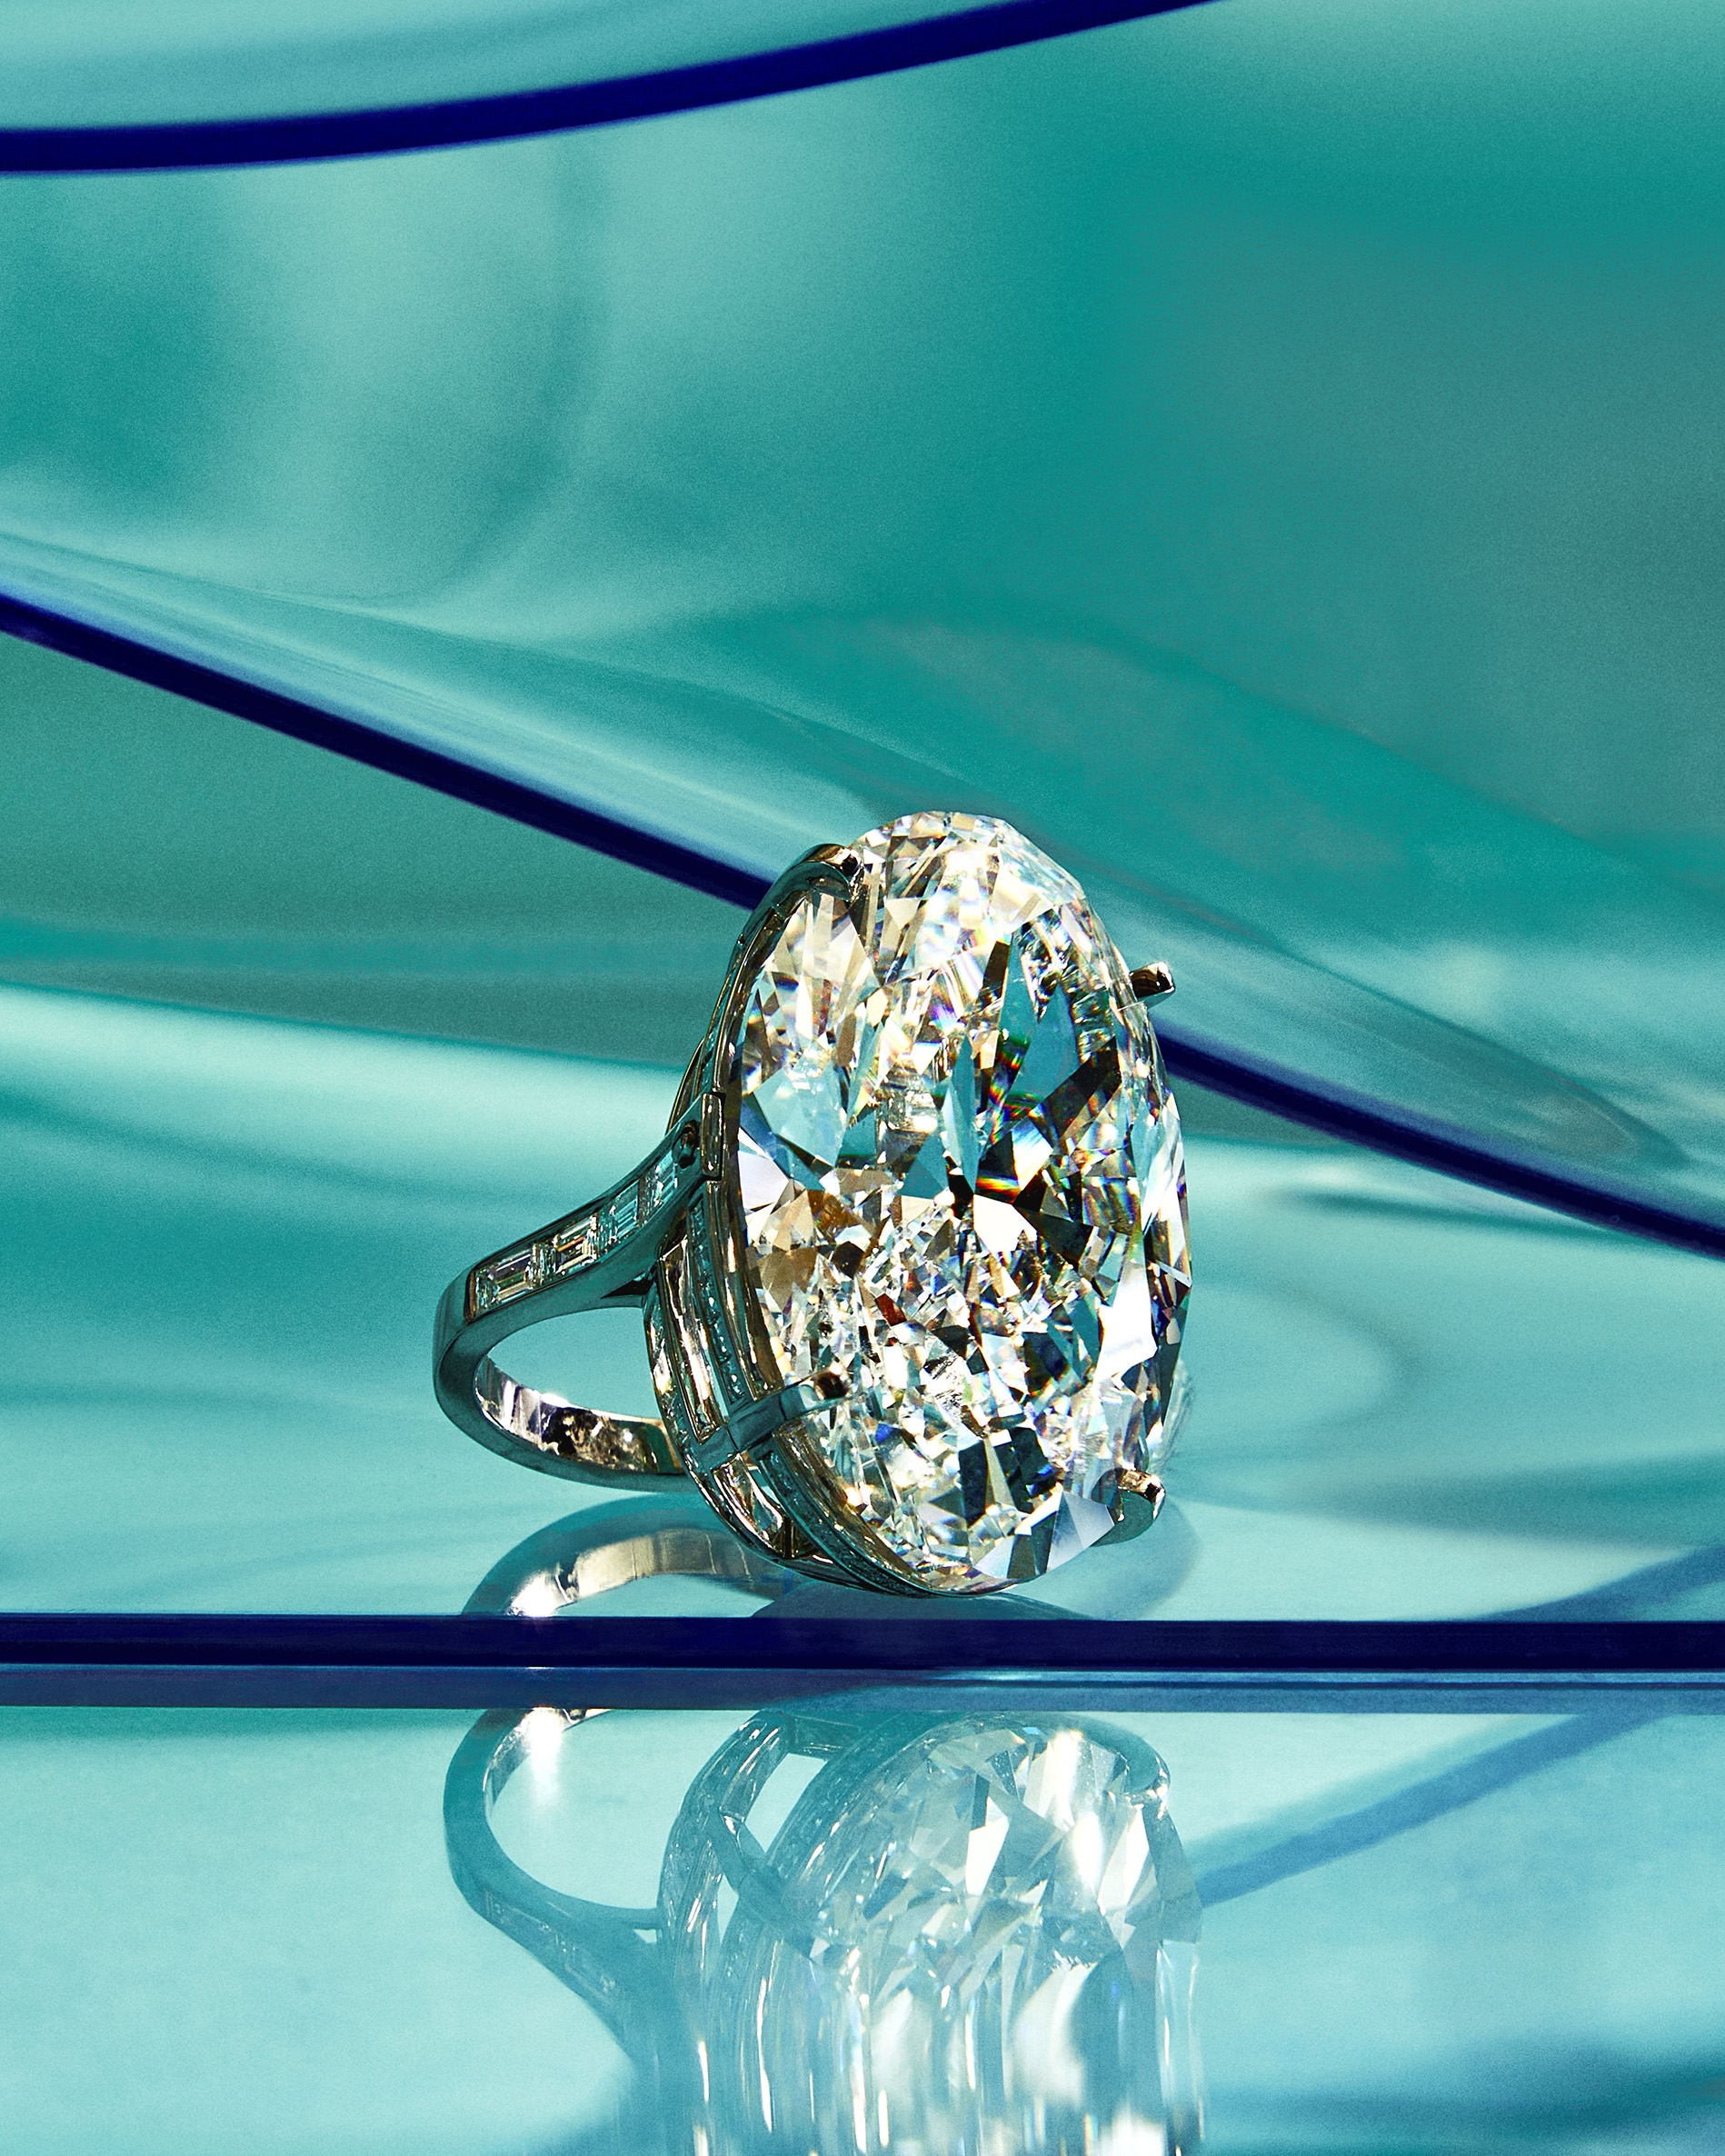 The Empire Diamond can be popped out and mounted onto a ring by carefully unscrewing a few small fasteners around the stone. Photo CHELSIE CRAIG/WWD